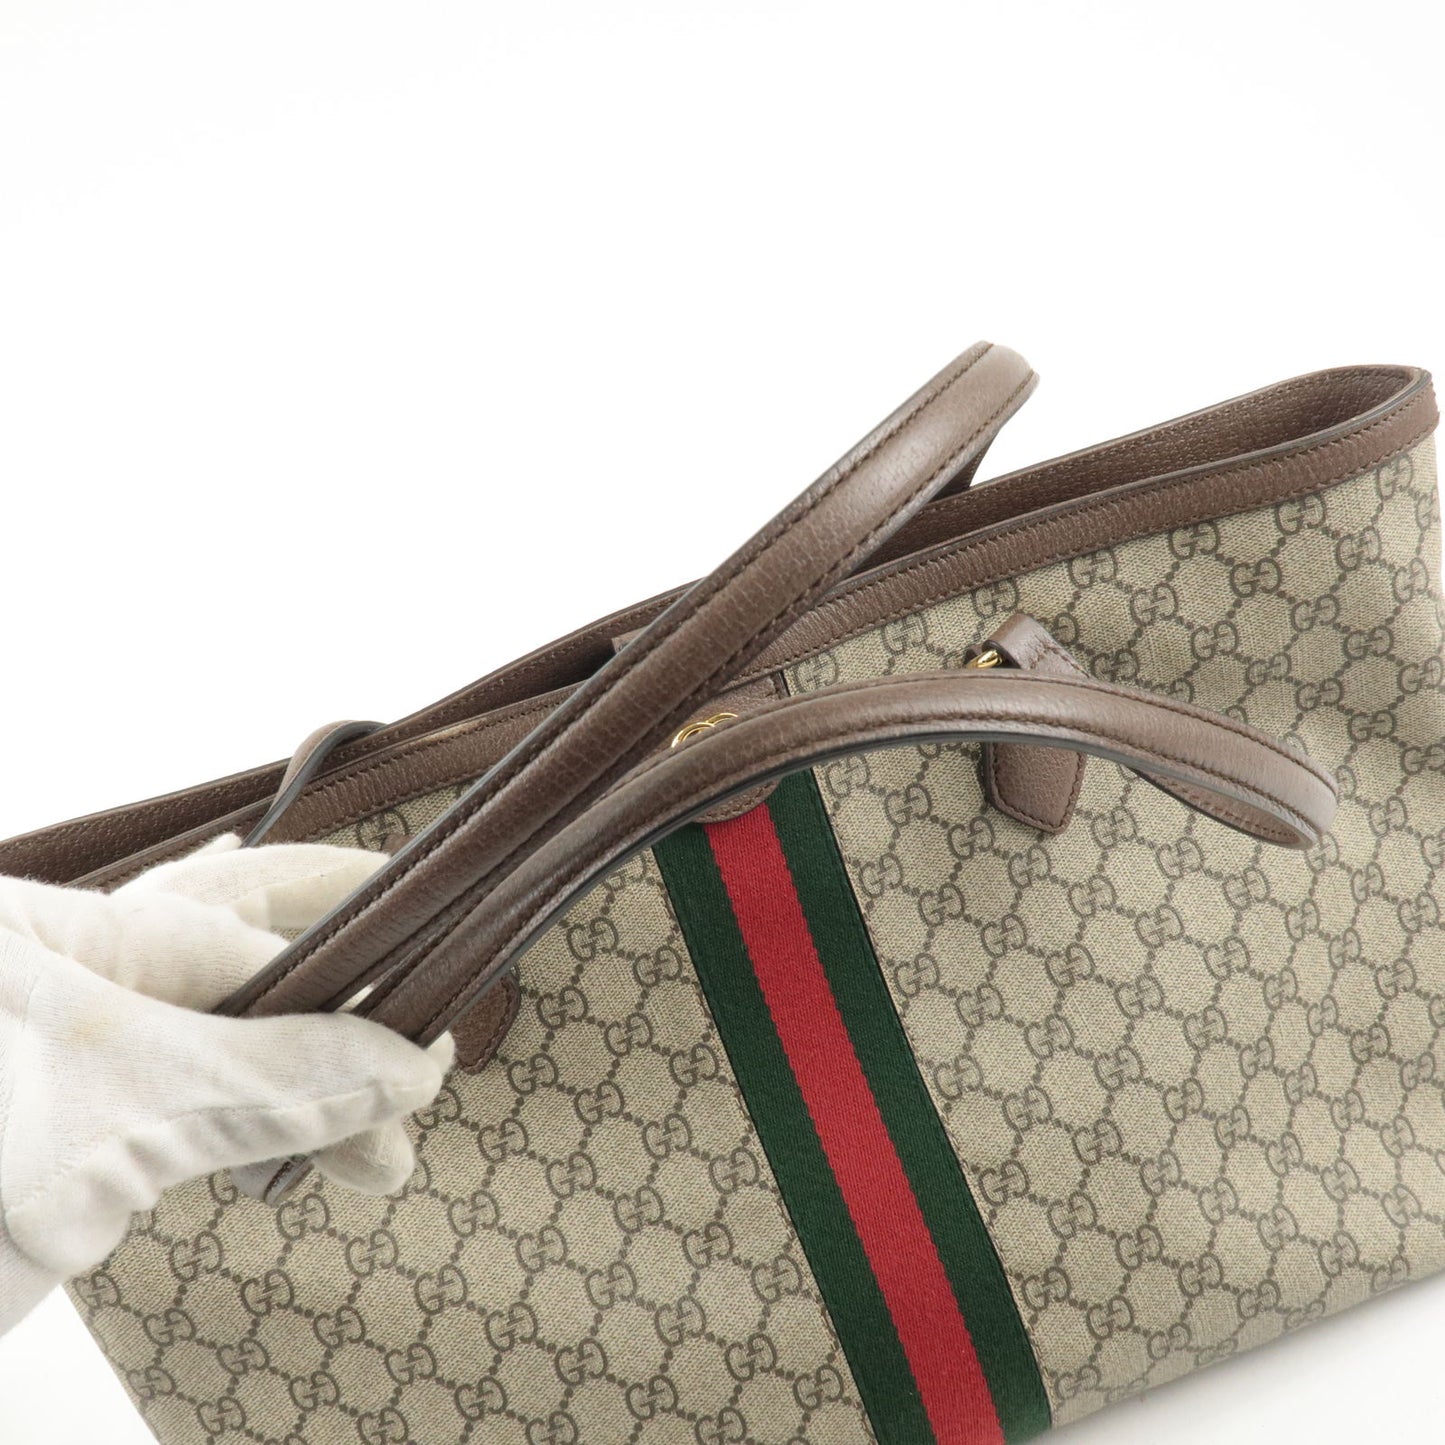 GUCCI-Sherry-Ophidia-GG-Supreme-Leather-Medium-Tote-Bag-631685 –  dct-ep_vintage luxury Store